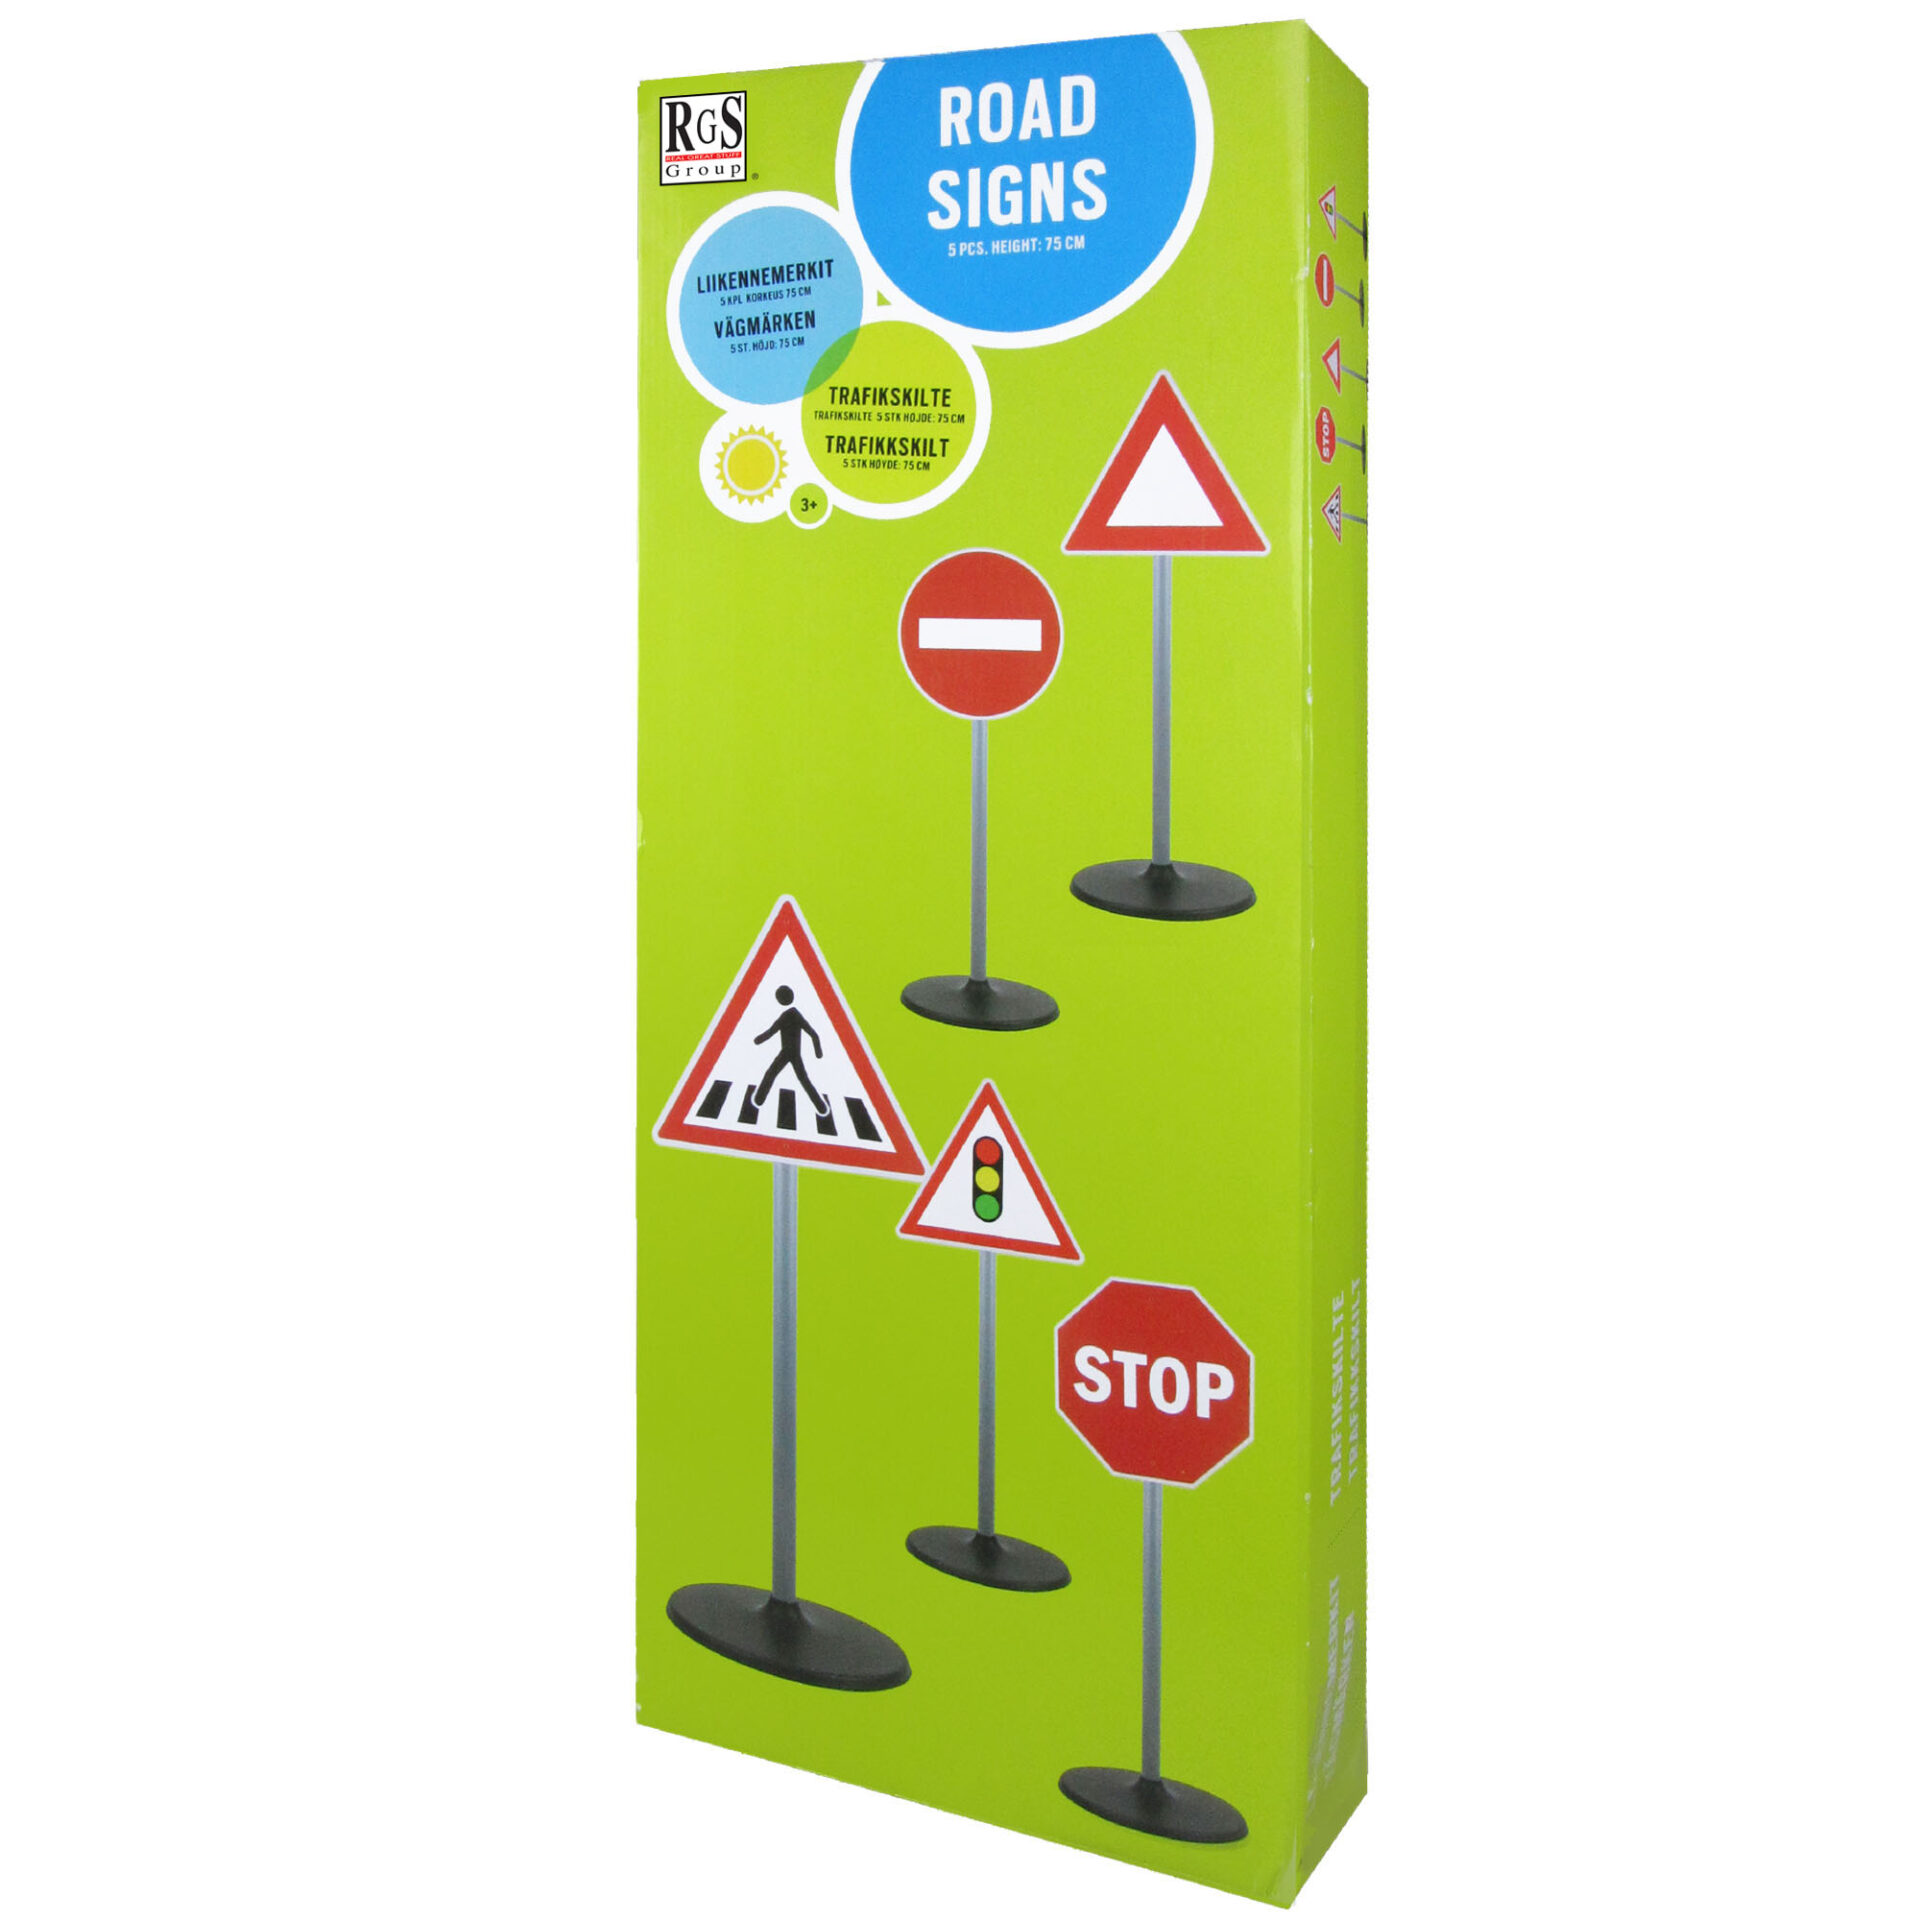 Road Signs | RGS Group